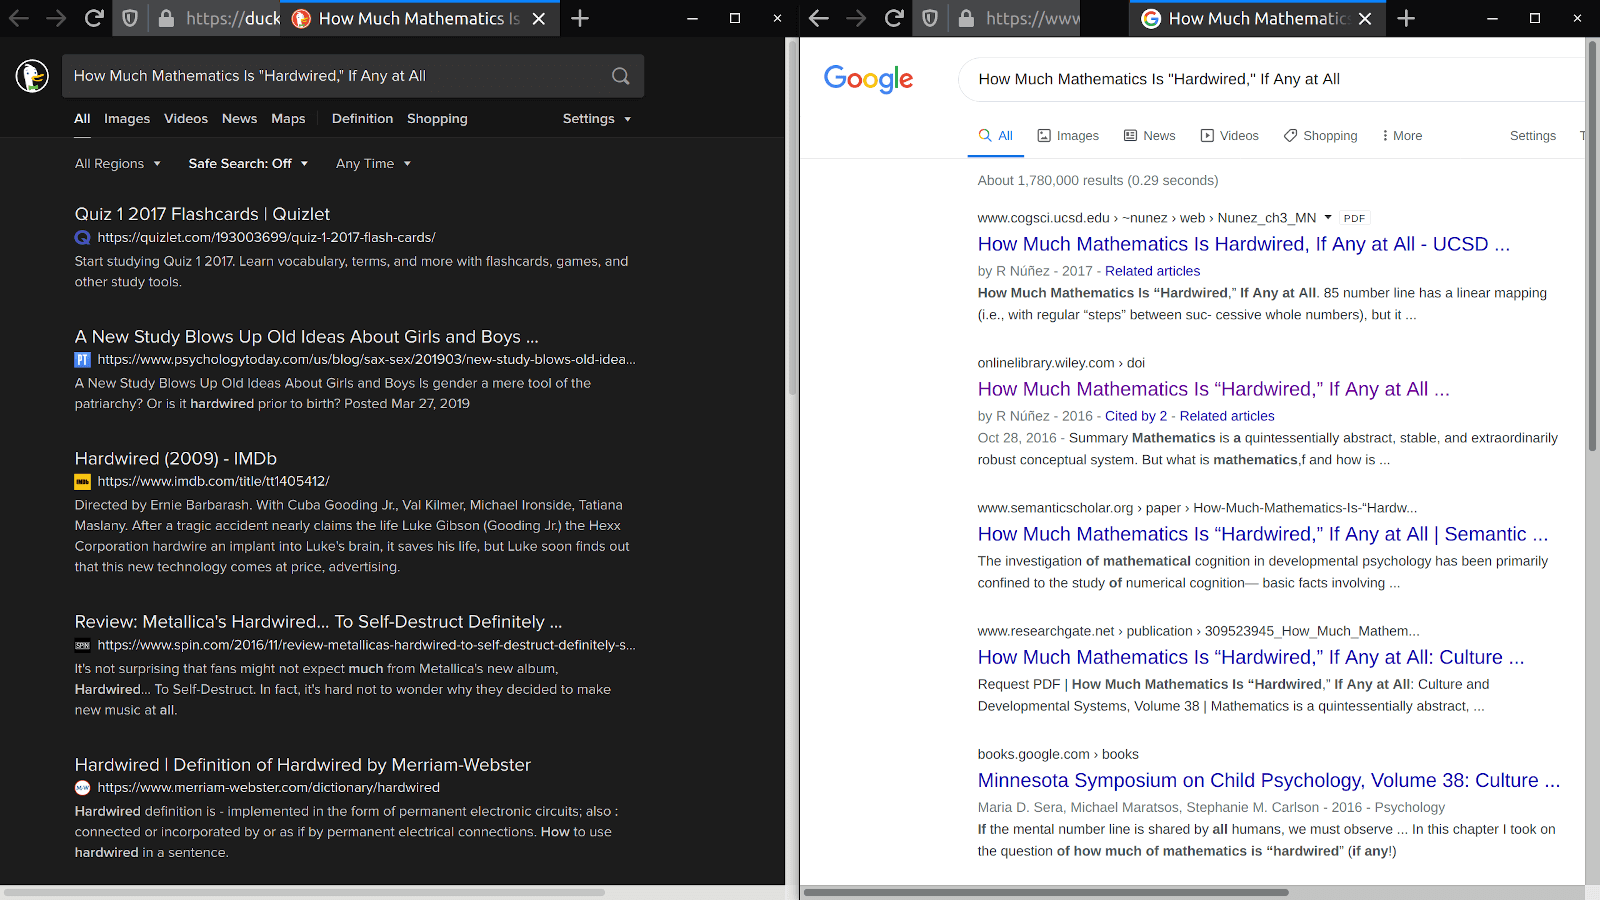 Another ddg vs google search results page